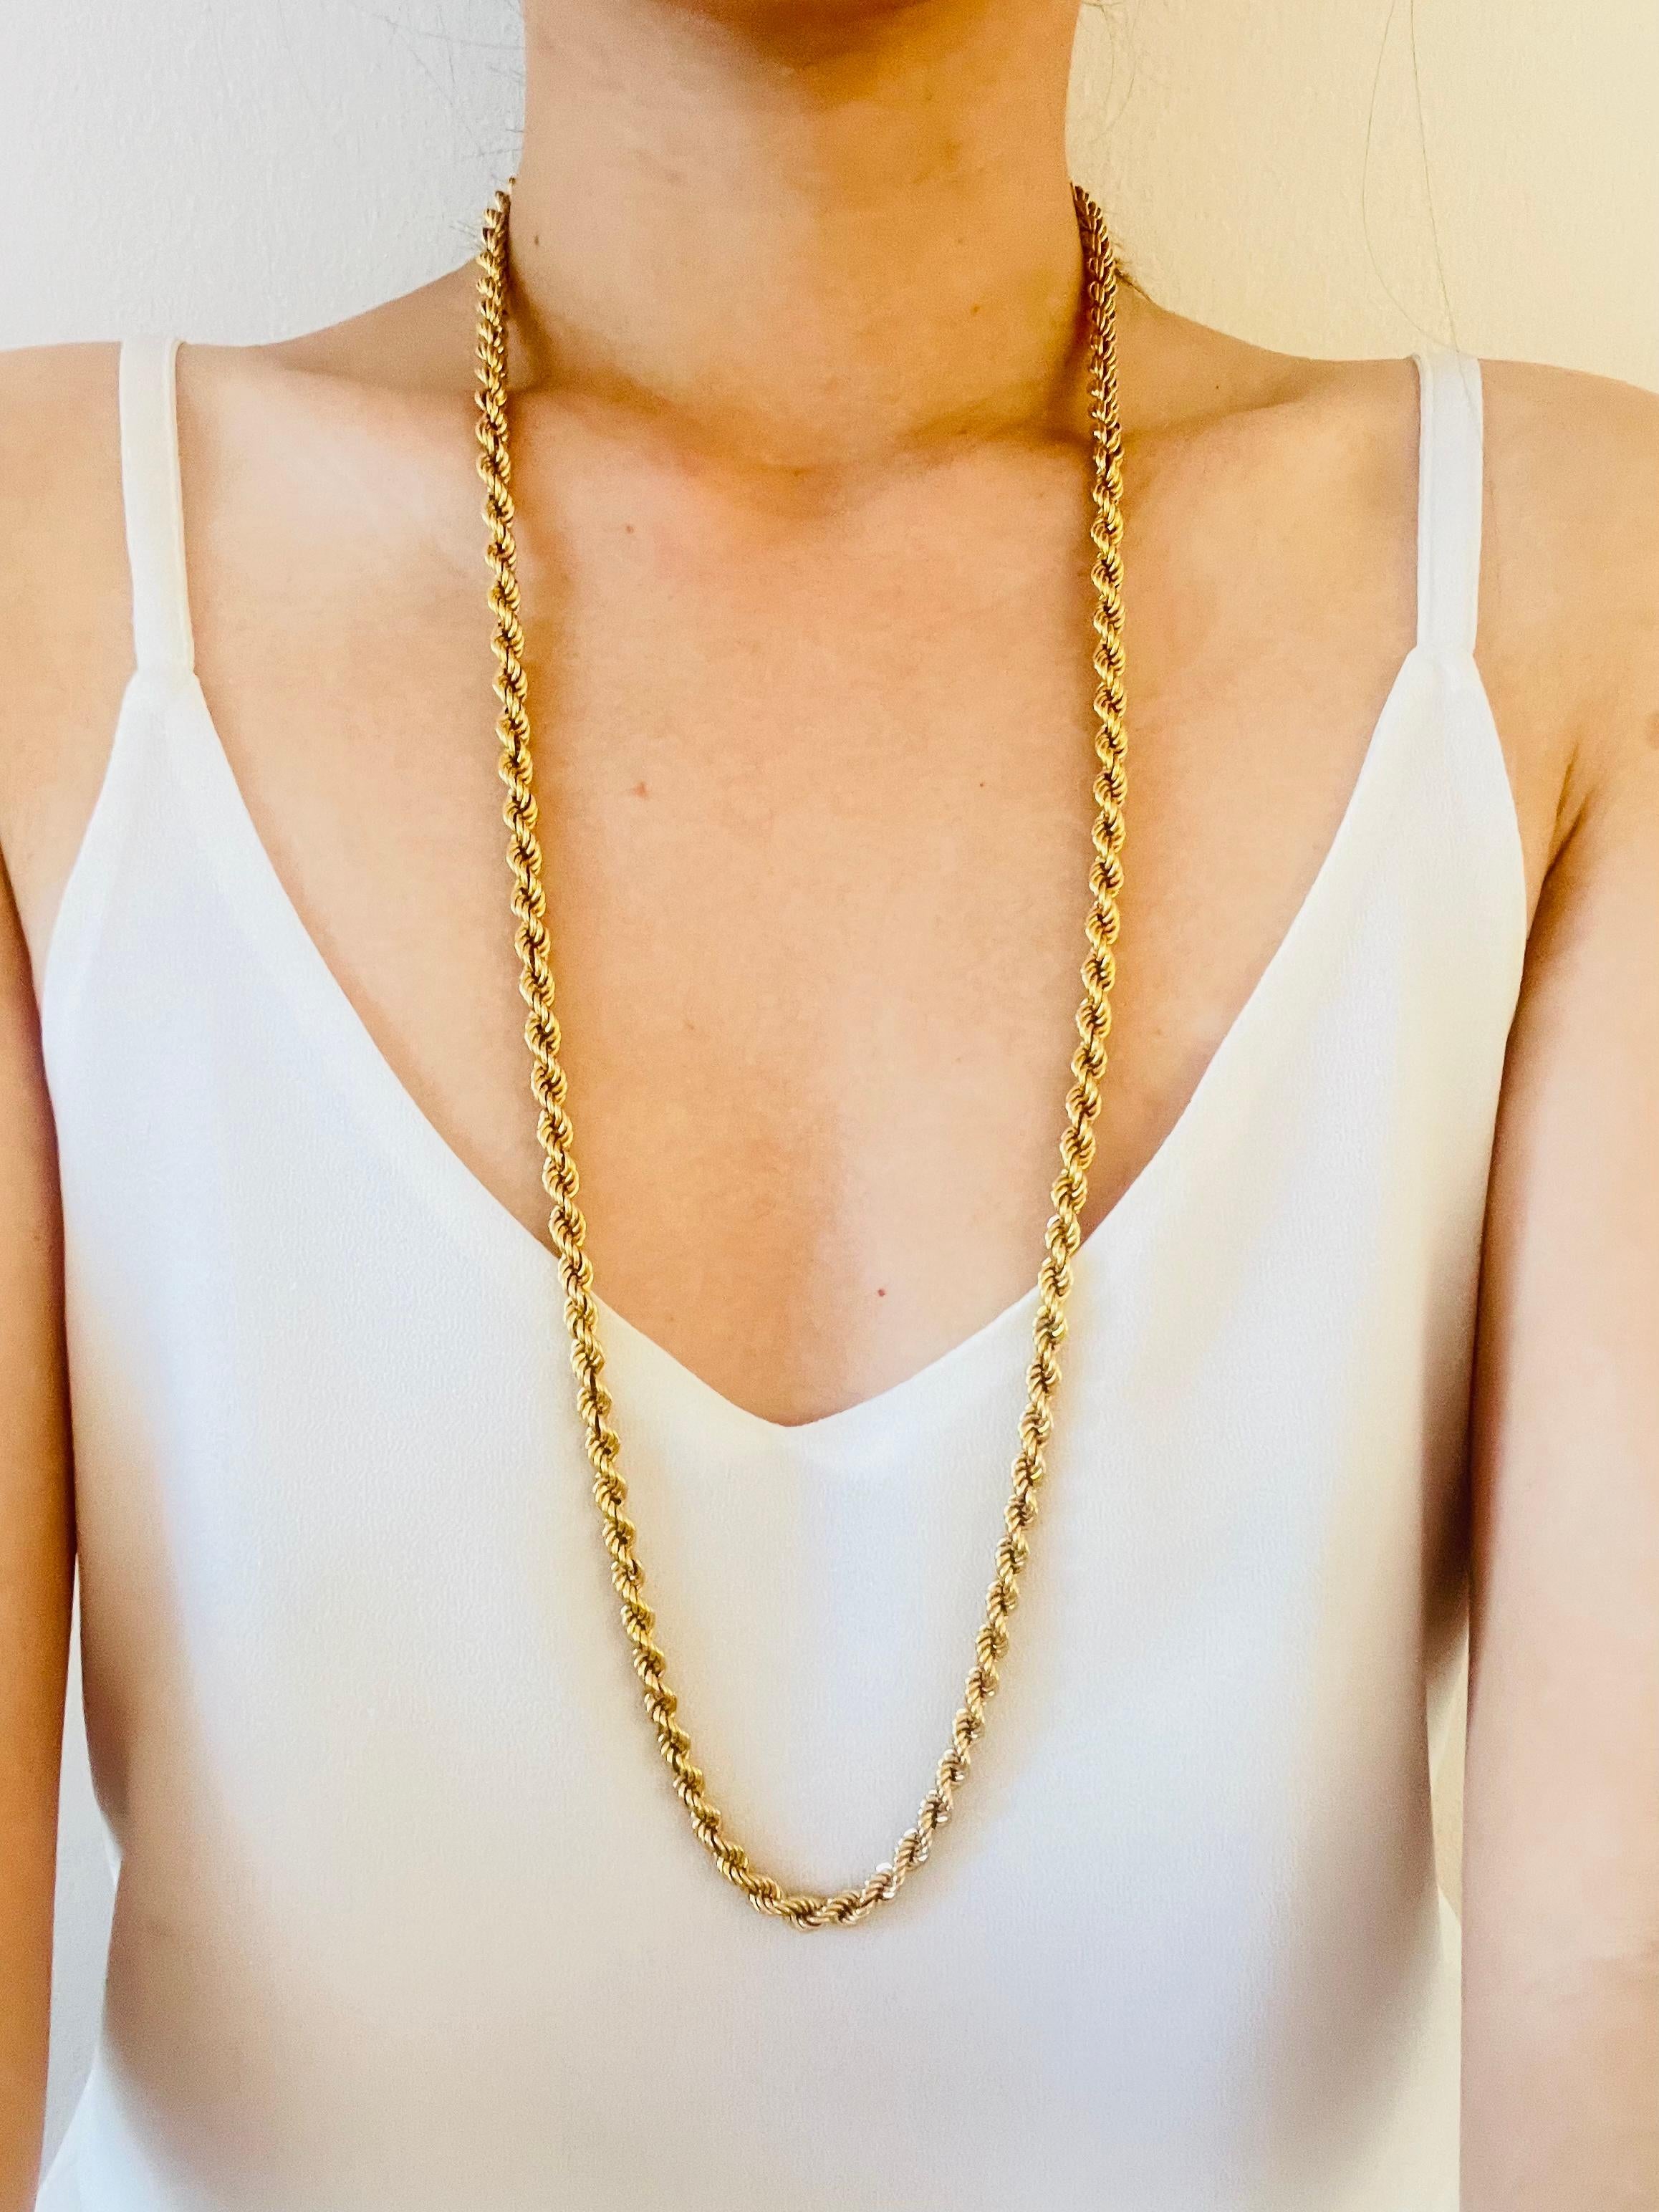 Christian Dior Vintage 1980s Versatile Twist Rope Chain Gold Long Necklace In Excellent Condition For Sale In Wokingham, England